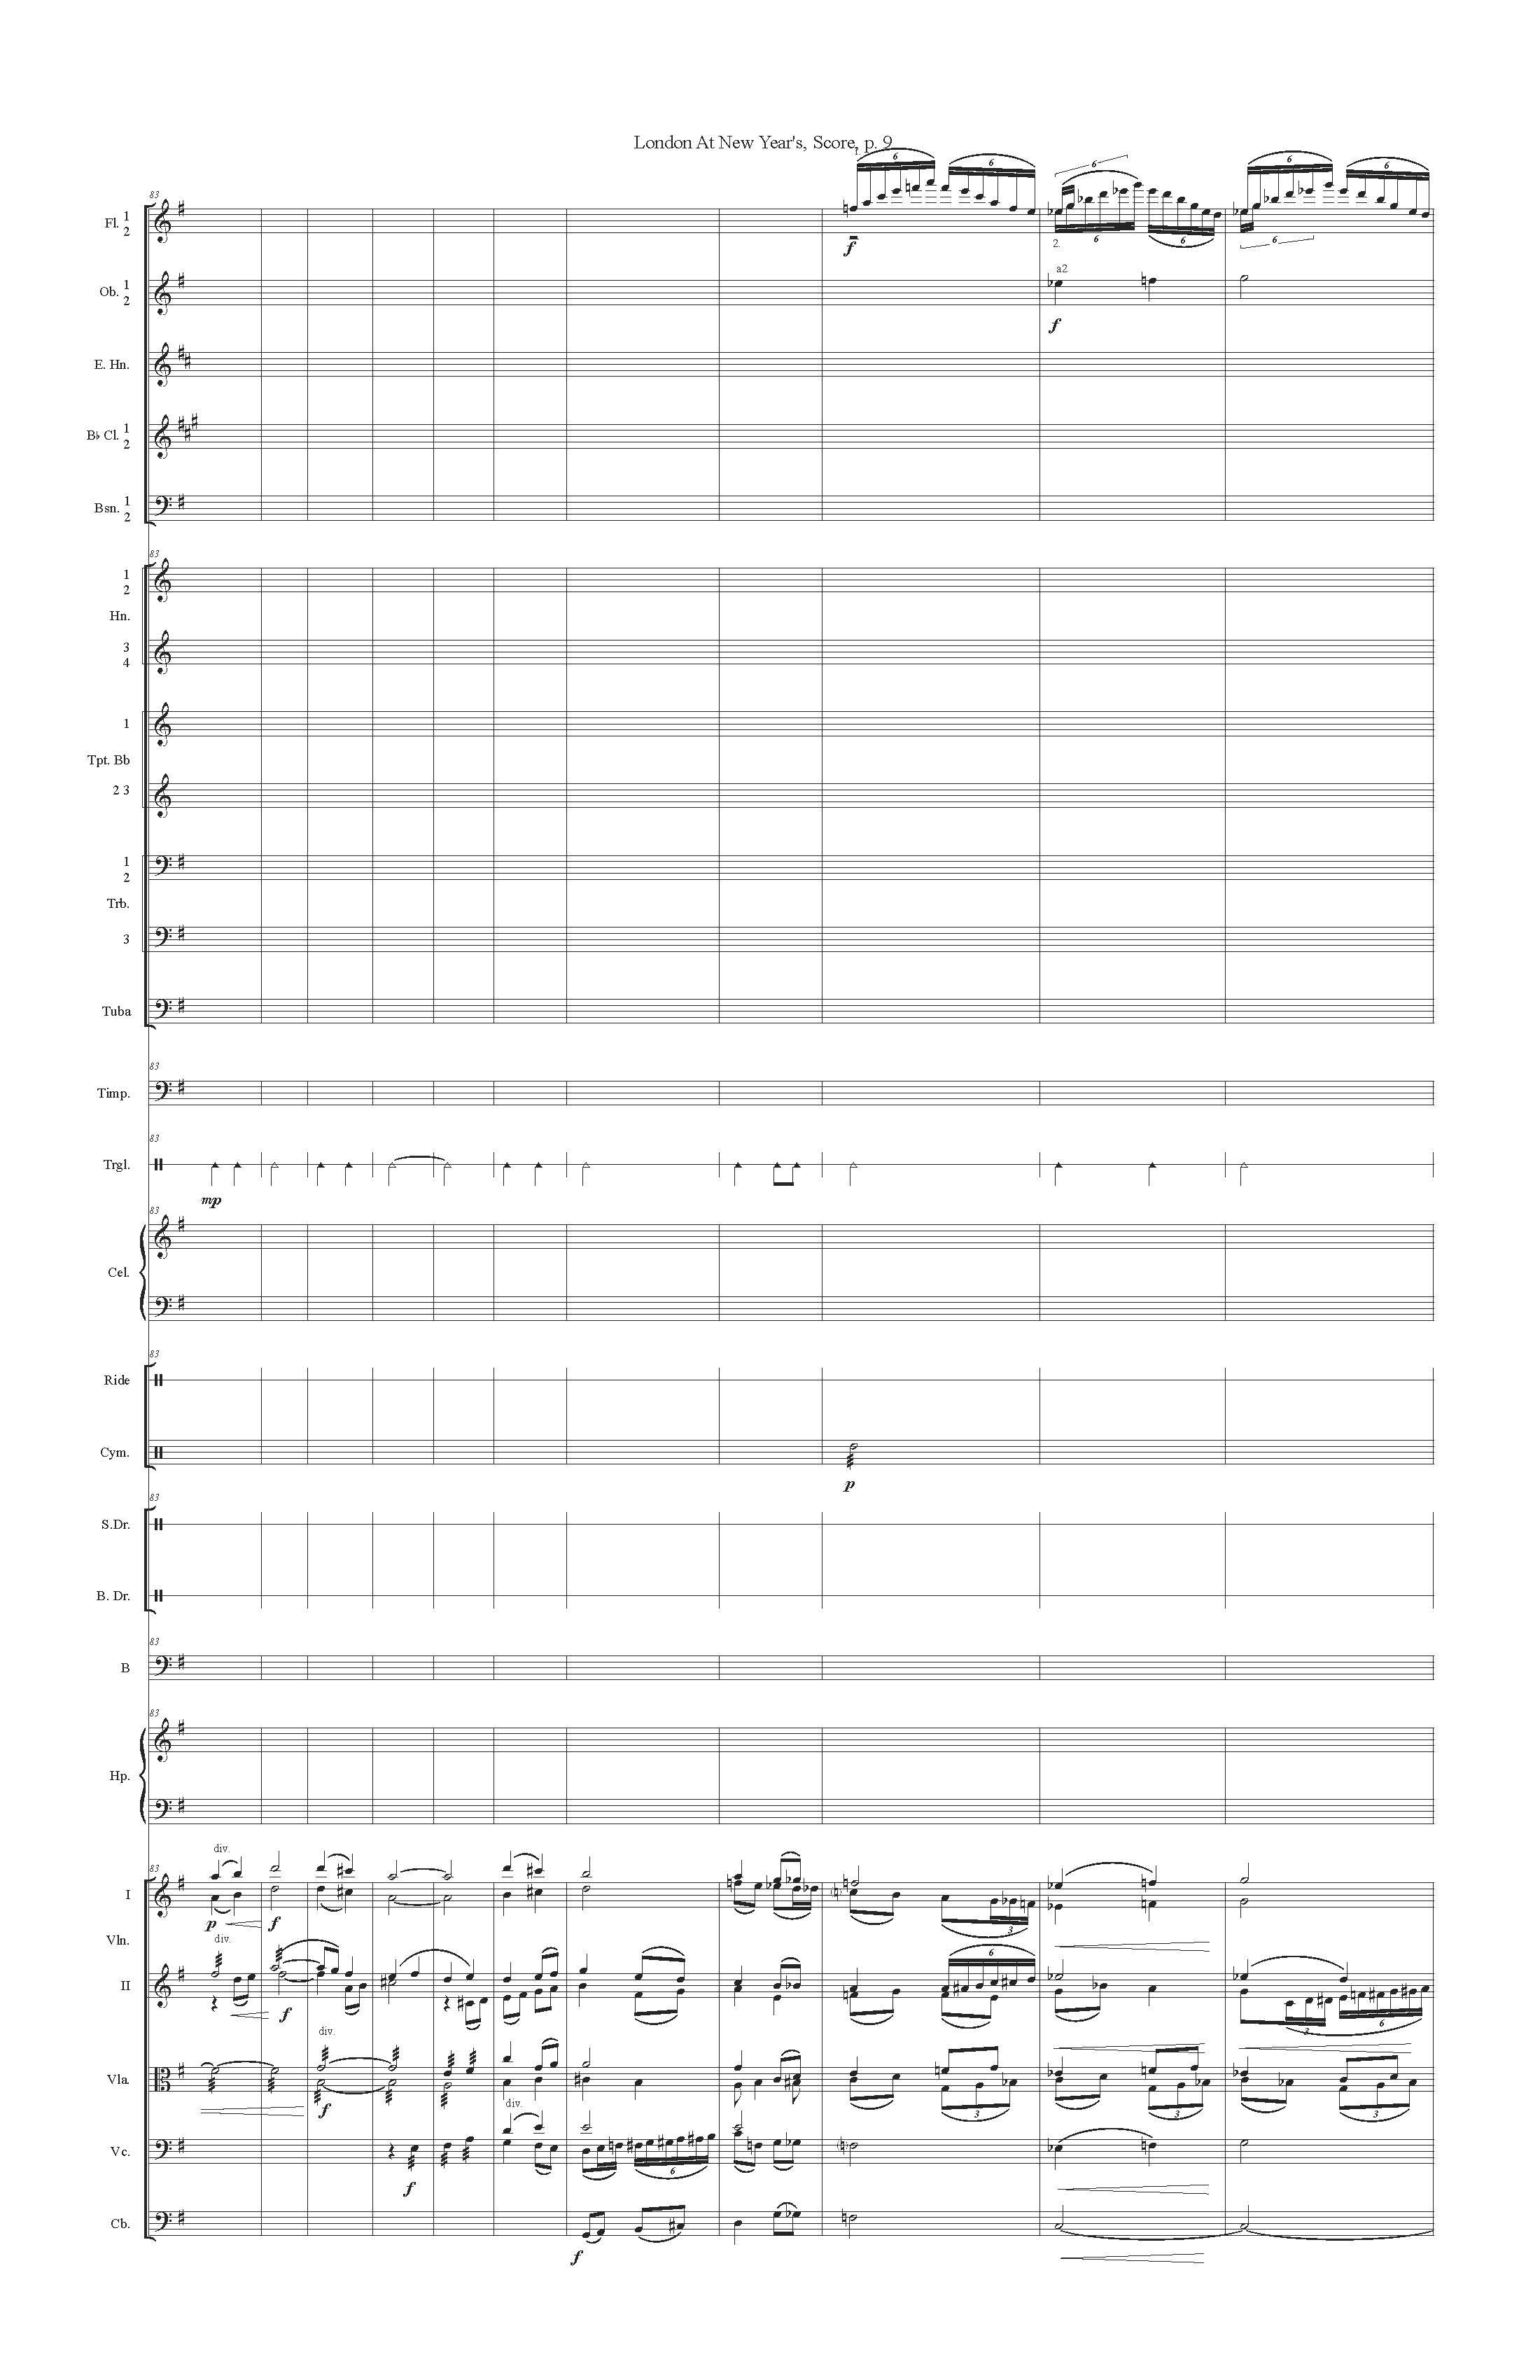 LONDON AT NEW YEARS ORCH - Score_Page_09.jpg